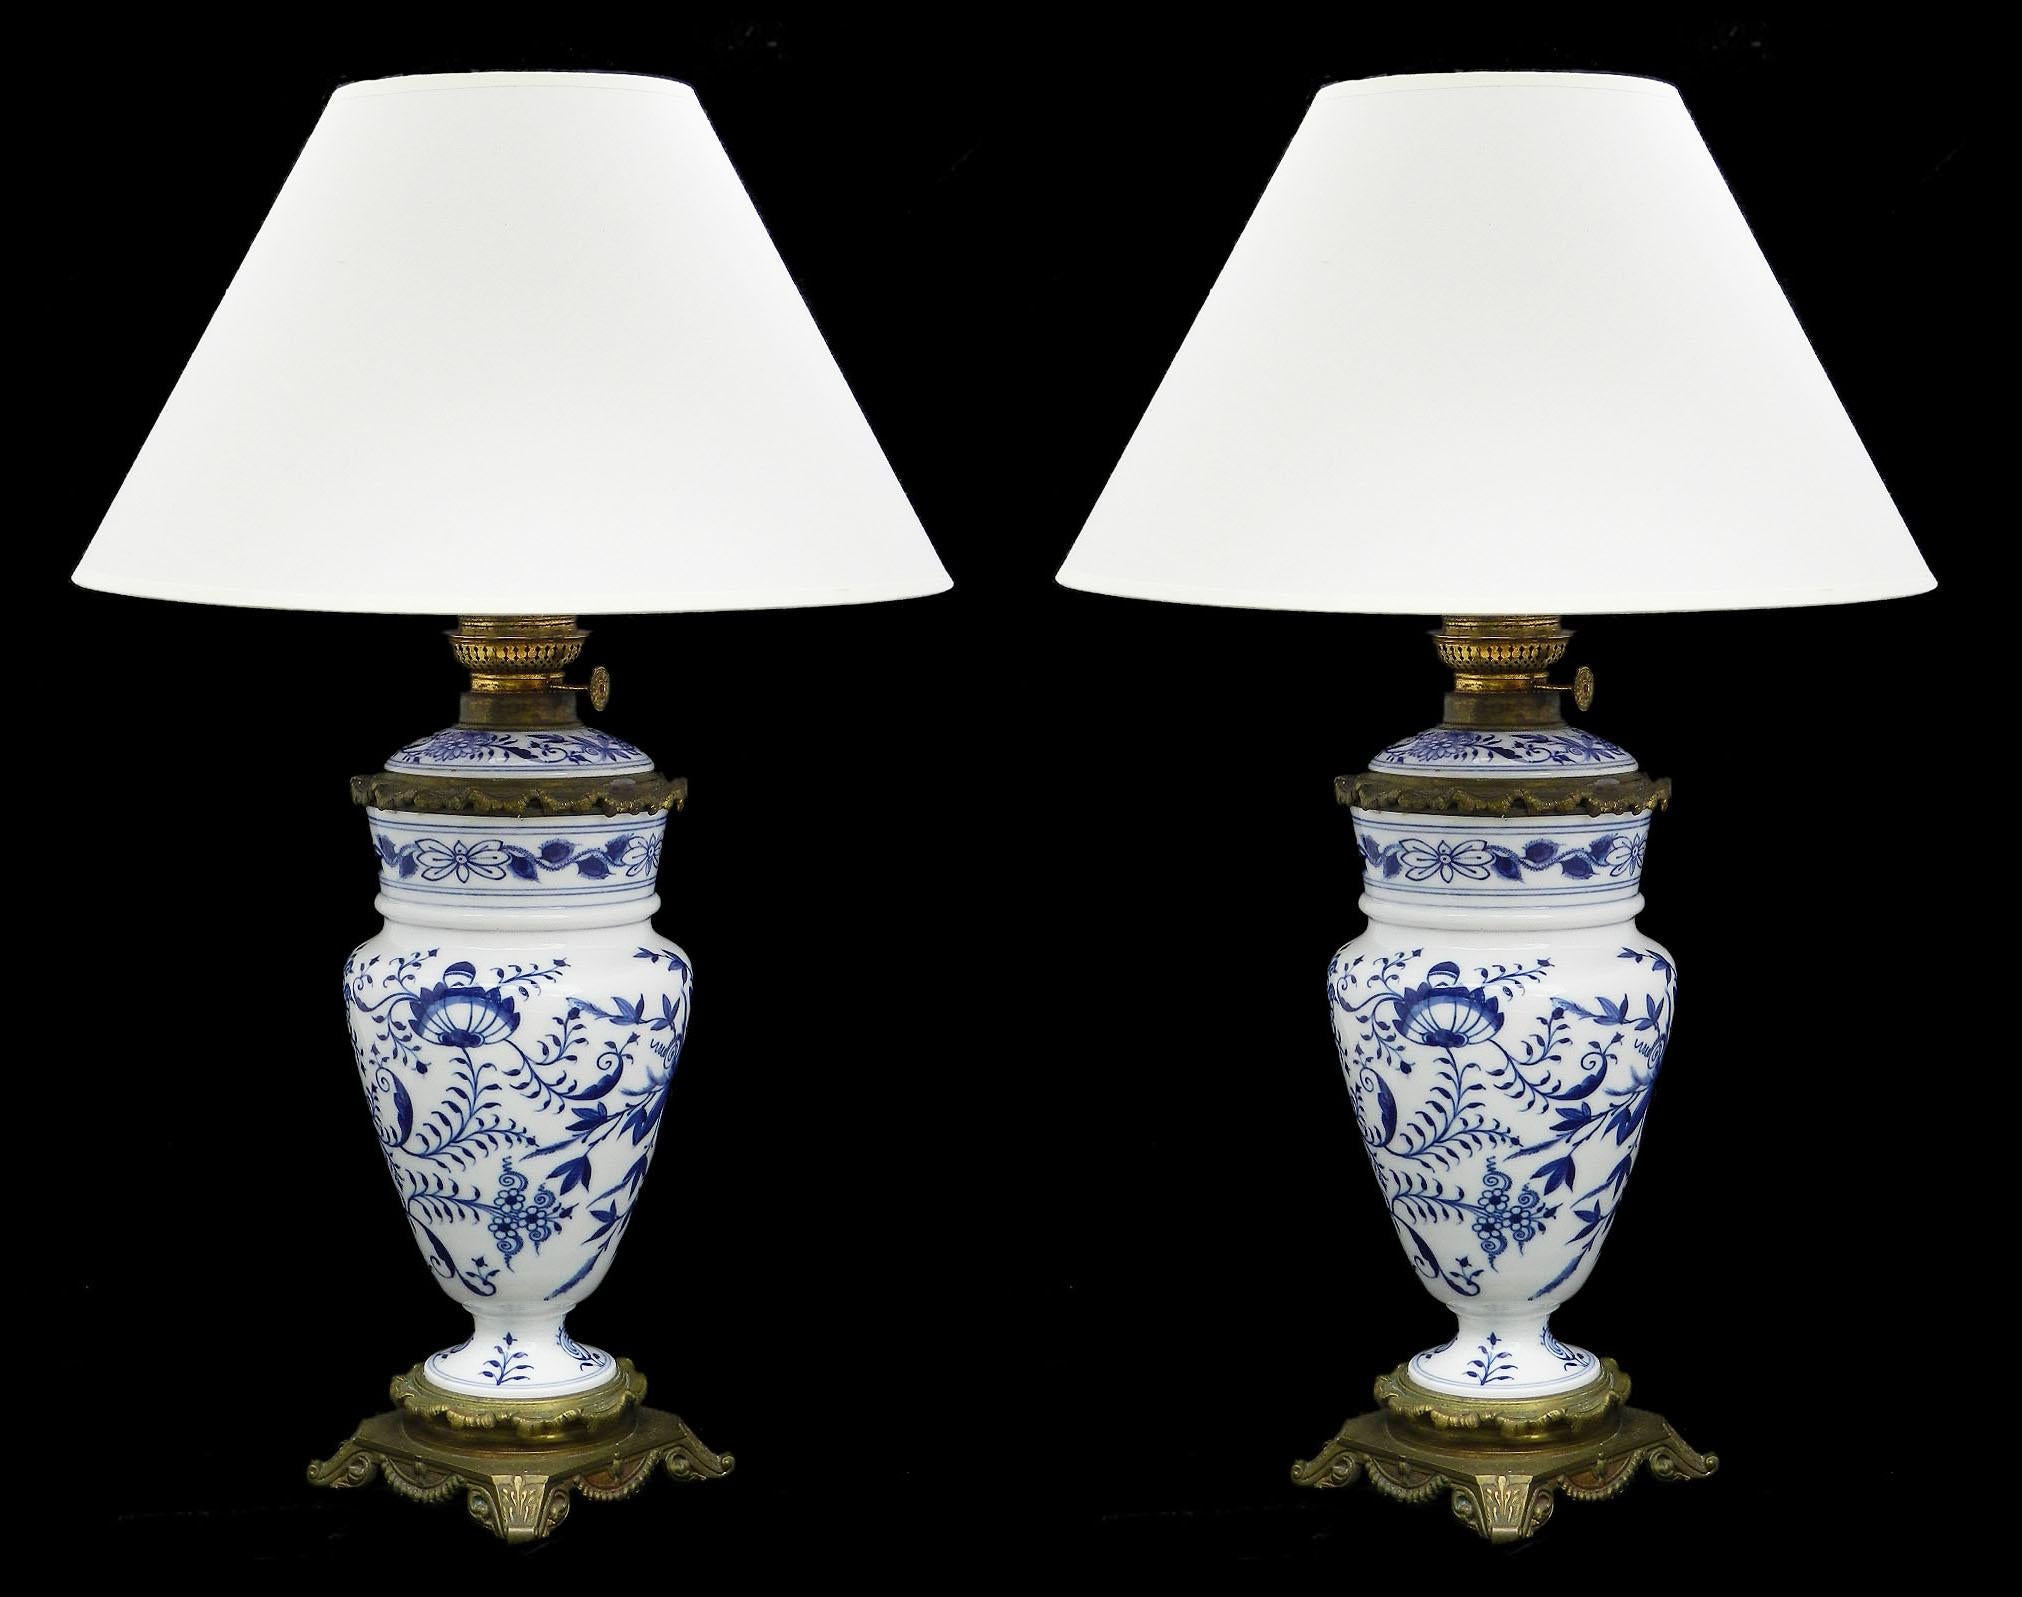 Pair of antique blue and white oil lamps converted to electricity, circa 1900-1910
Chinoiserie floral porcelain
with gilt metal mounts and retaining the characterful oil lamp fittings
Good antique condition sound and solid with minor signs of